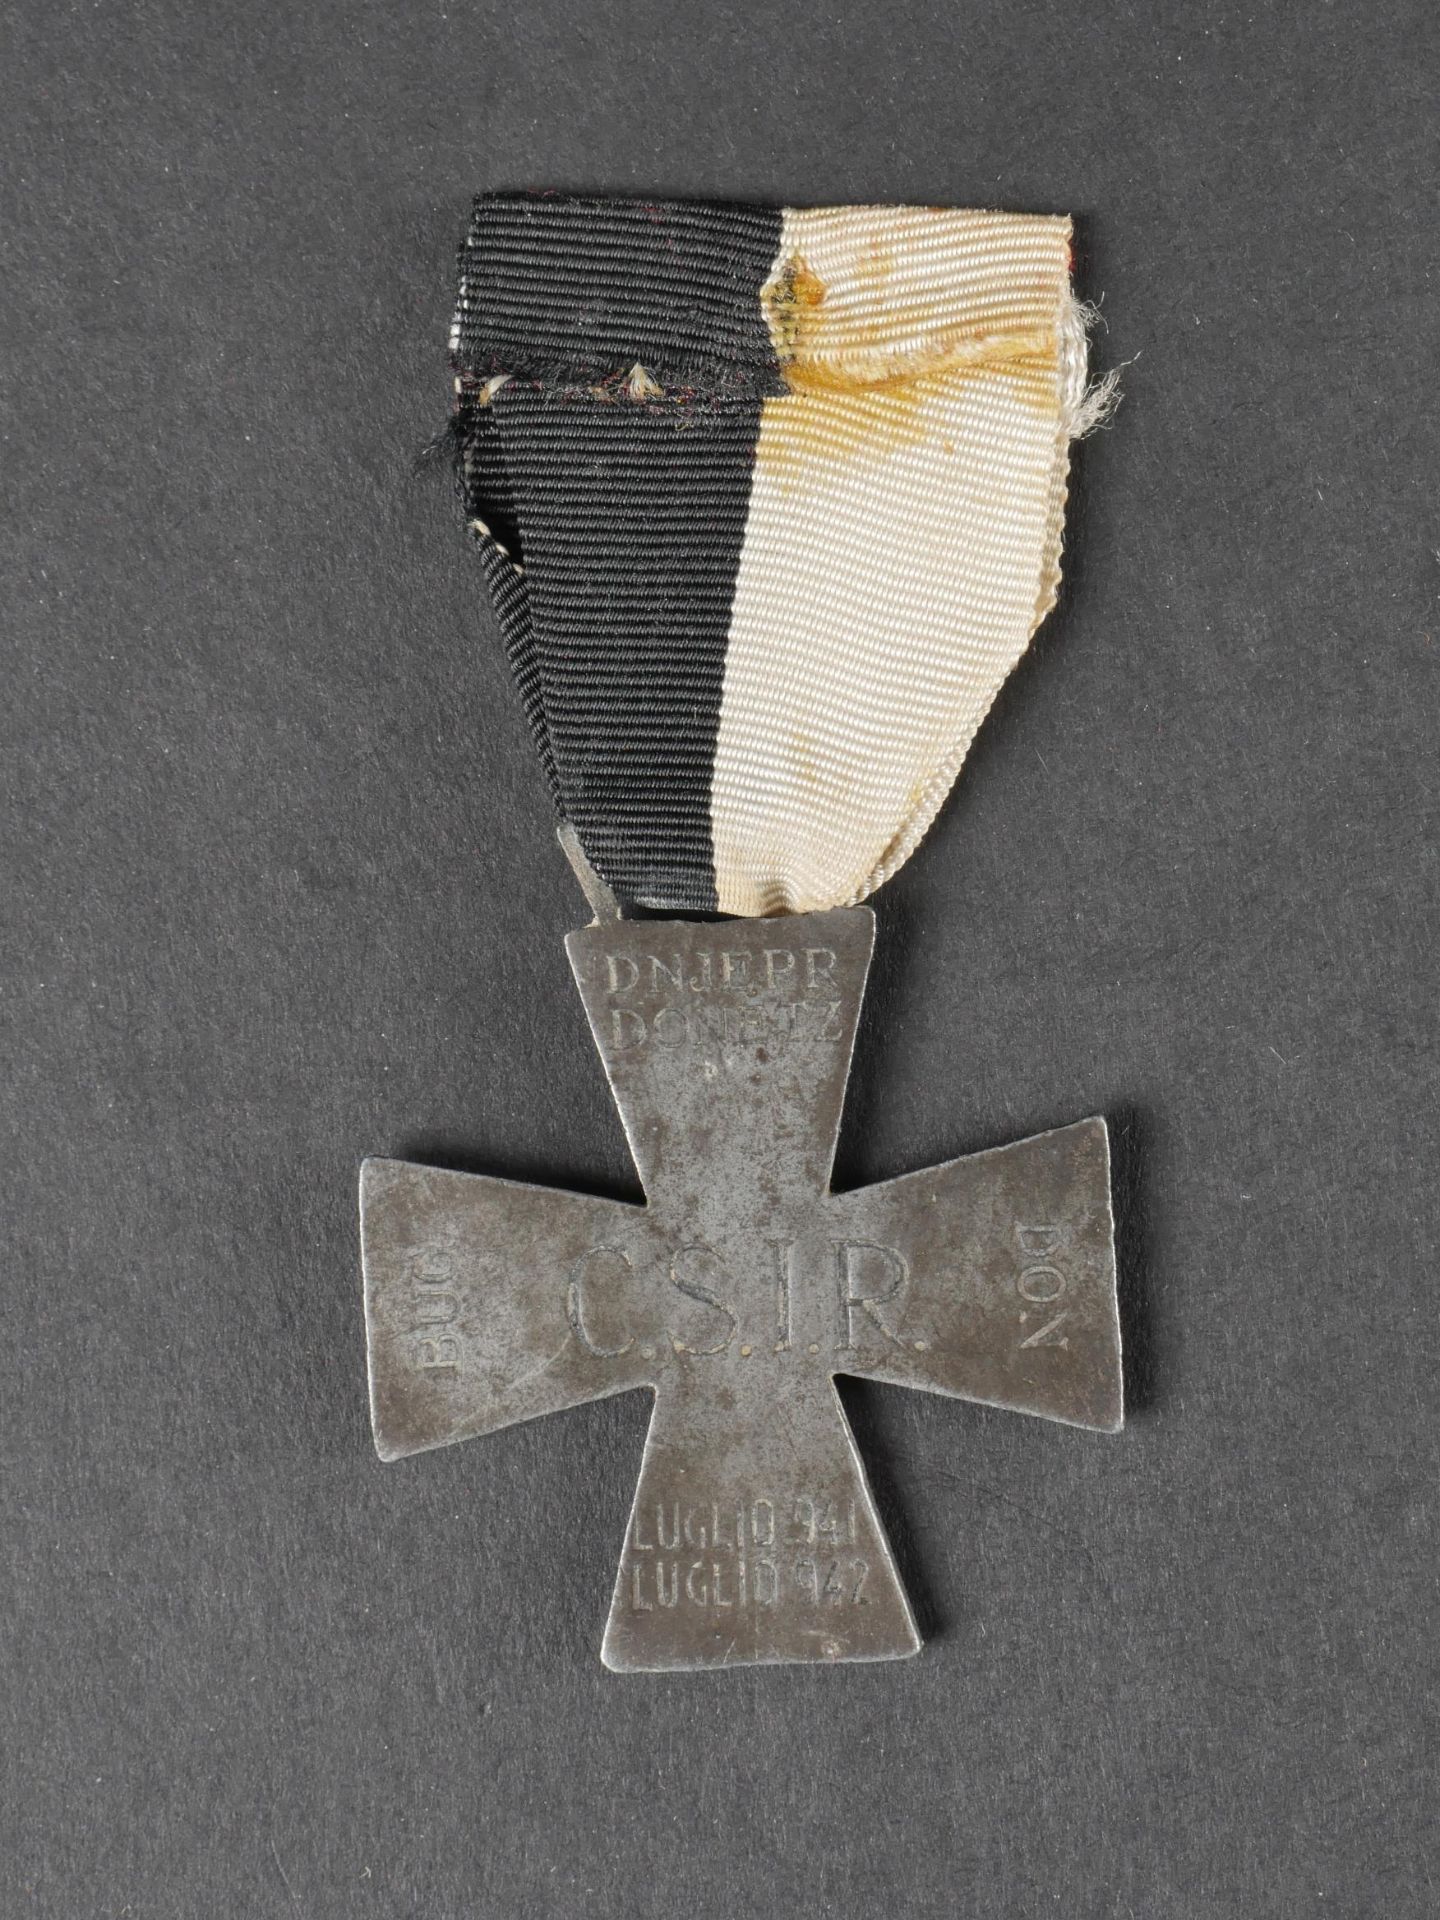 Croix du Corps expeditionnaire italien en Russie. Cross of the Italian Expeditionary Corps in Russia - Bild 2 aus 2